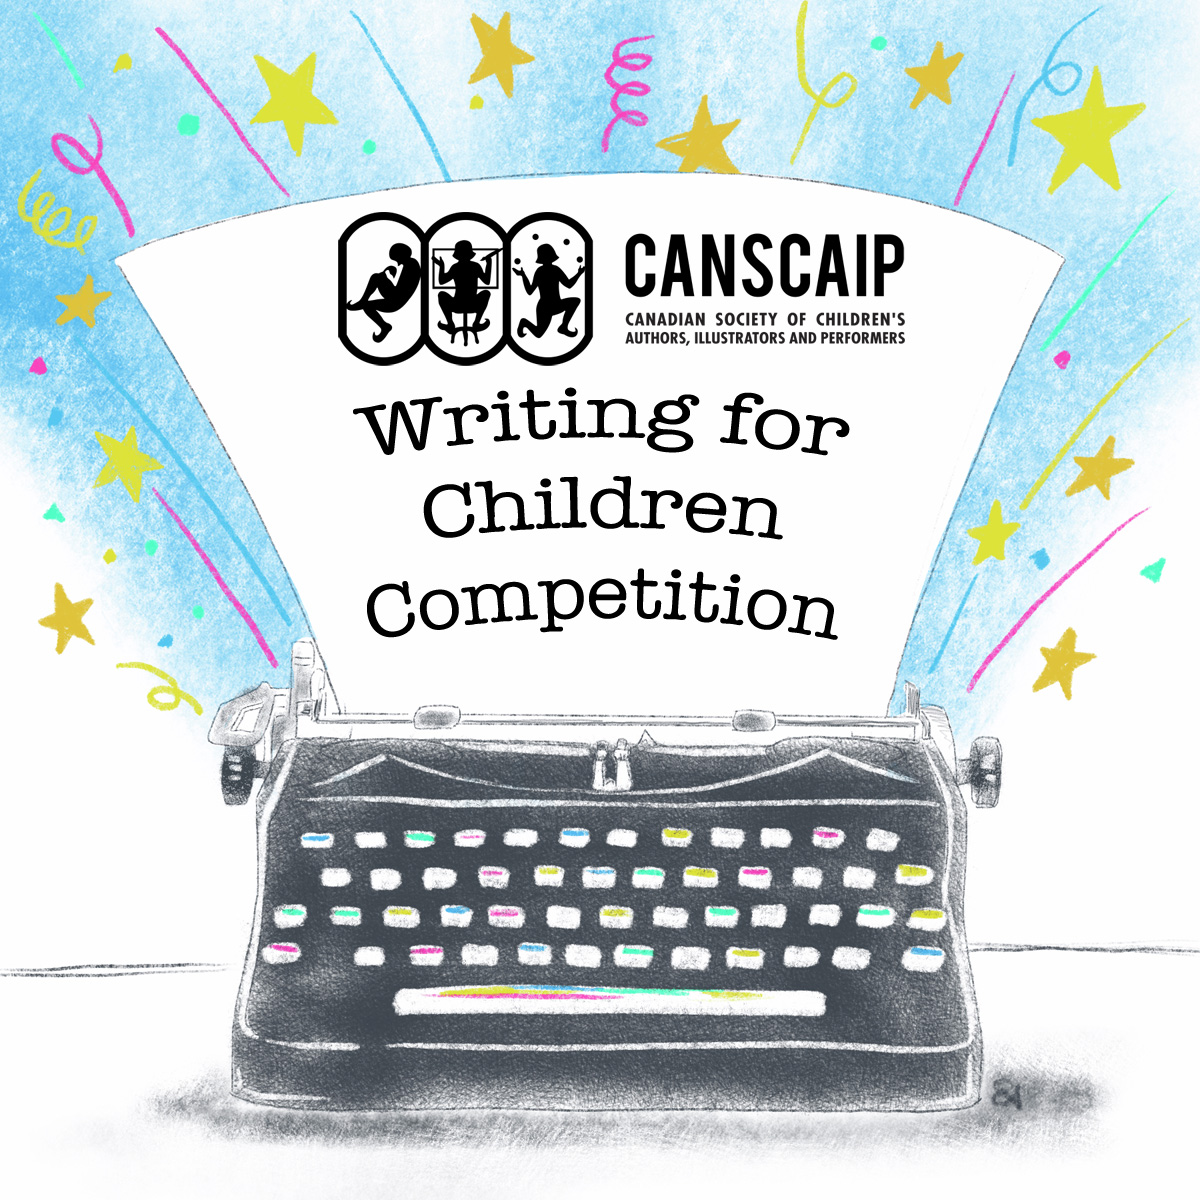 'Thanks CANSCAIP for this terrific opportunity. The very helpful evaluations have encouraged me to continue work on my book.' - Our Writing For Children Competition is all about encouraging and promoting not-yet-published Canadian #kidlit writers. Info: canscaip.org